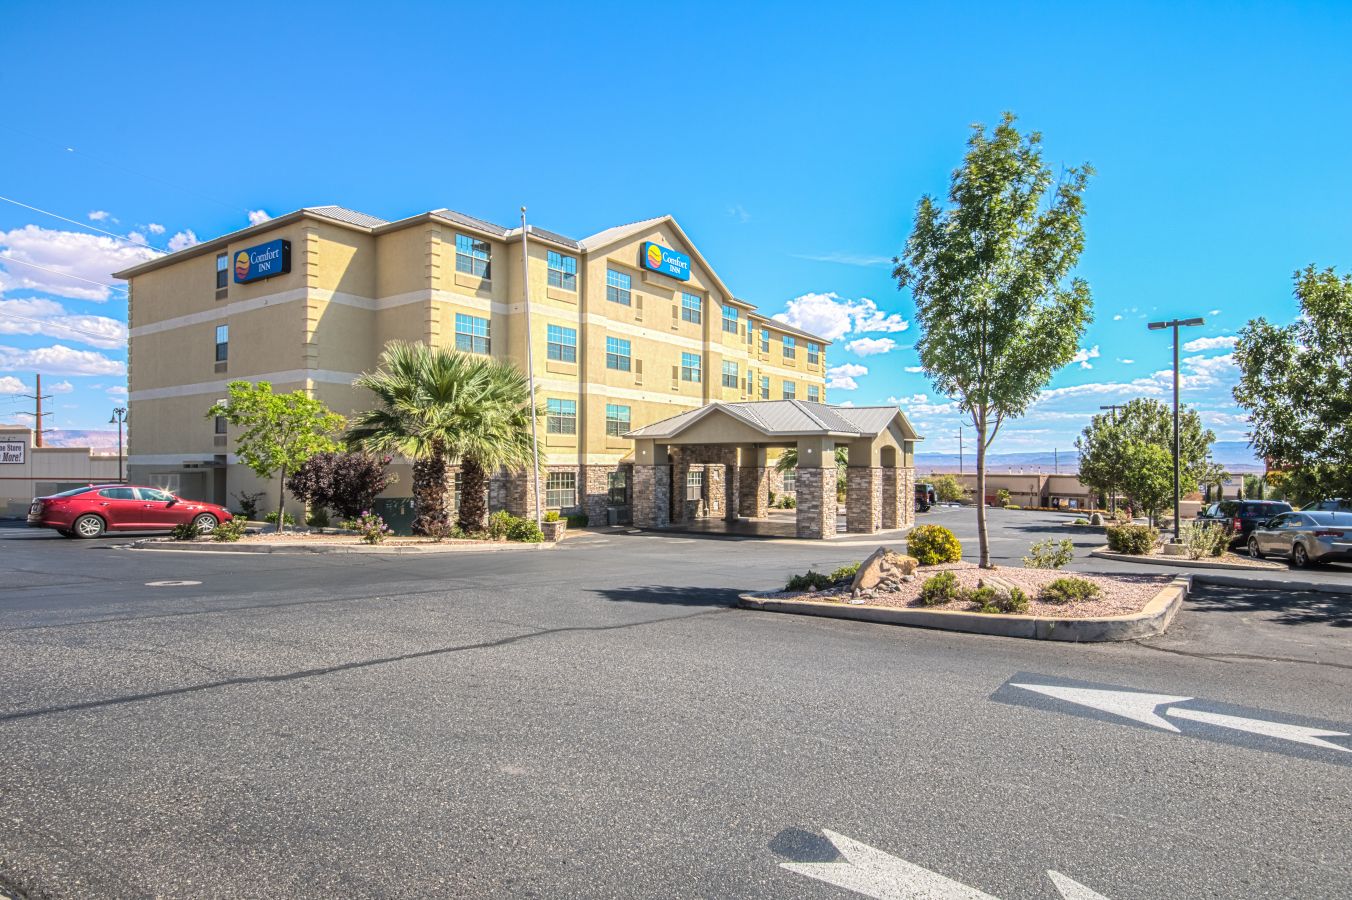 Comfort Inn located in St. George was sold by Greg Whitehead